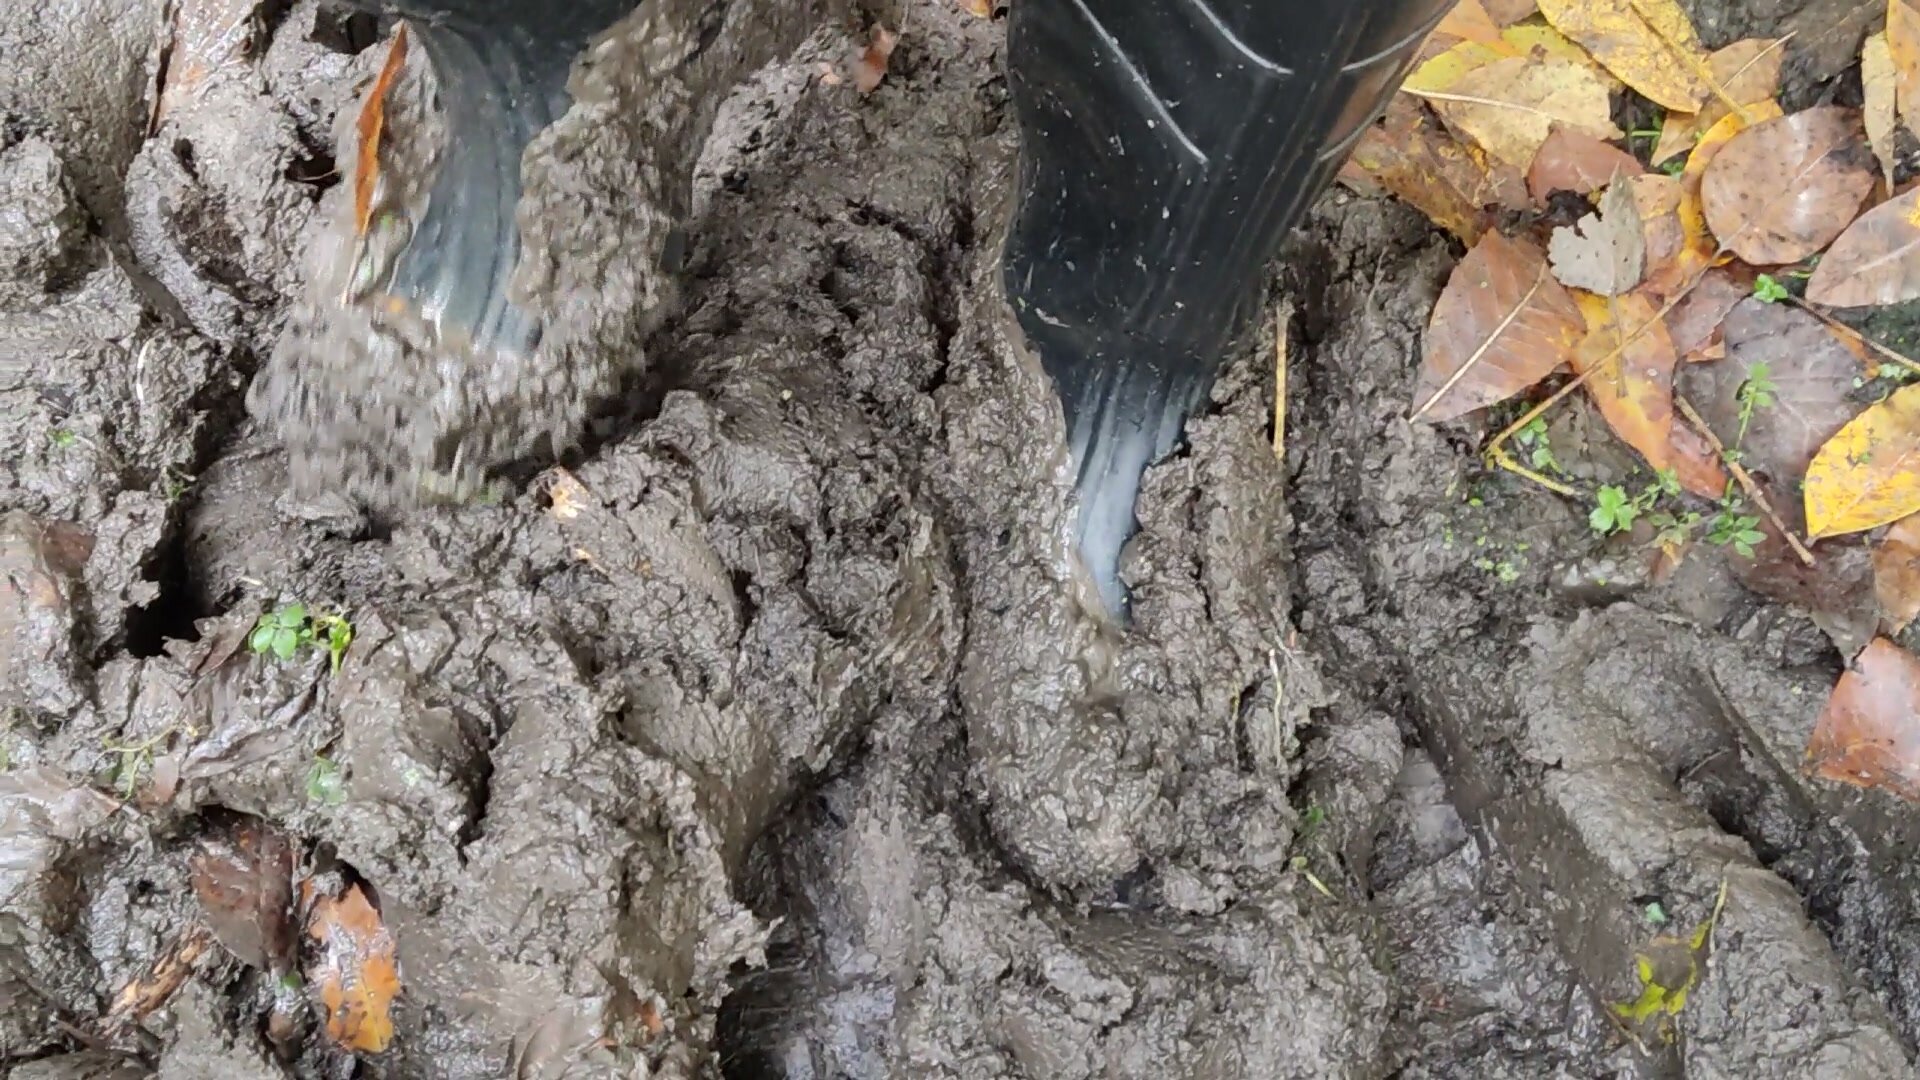 Rubber boots in mud - video 8